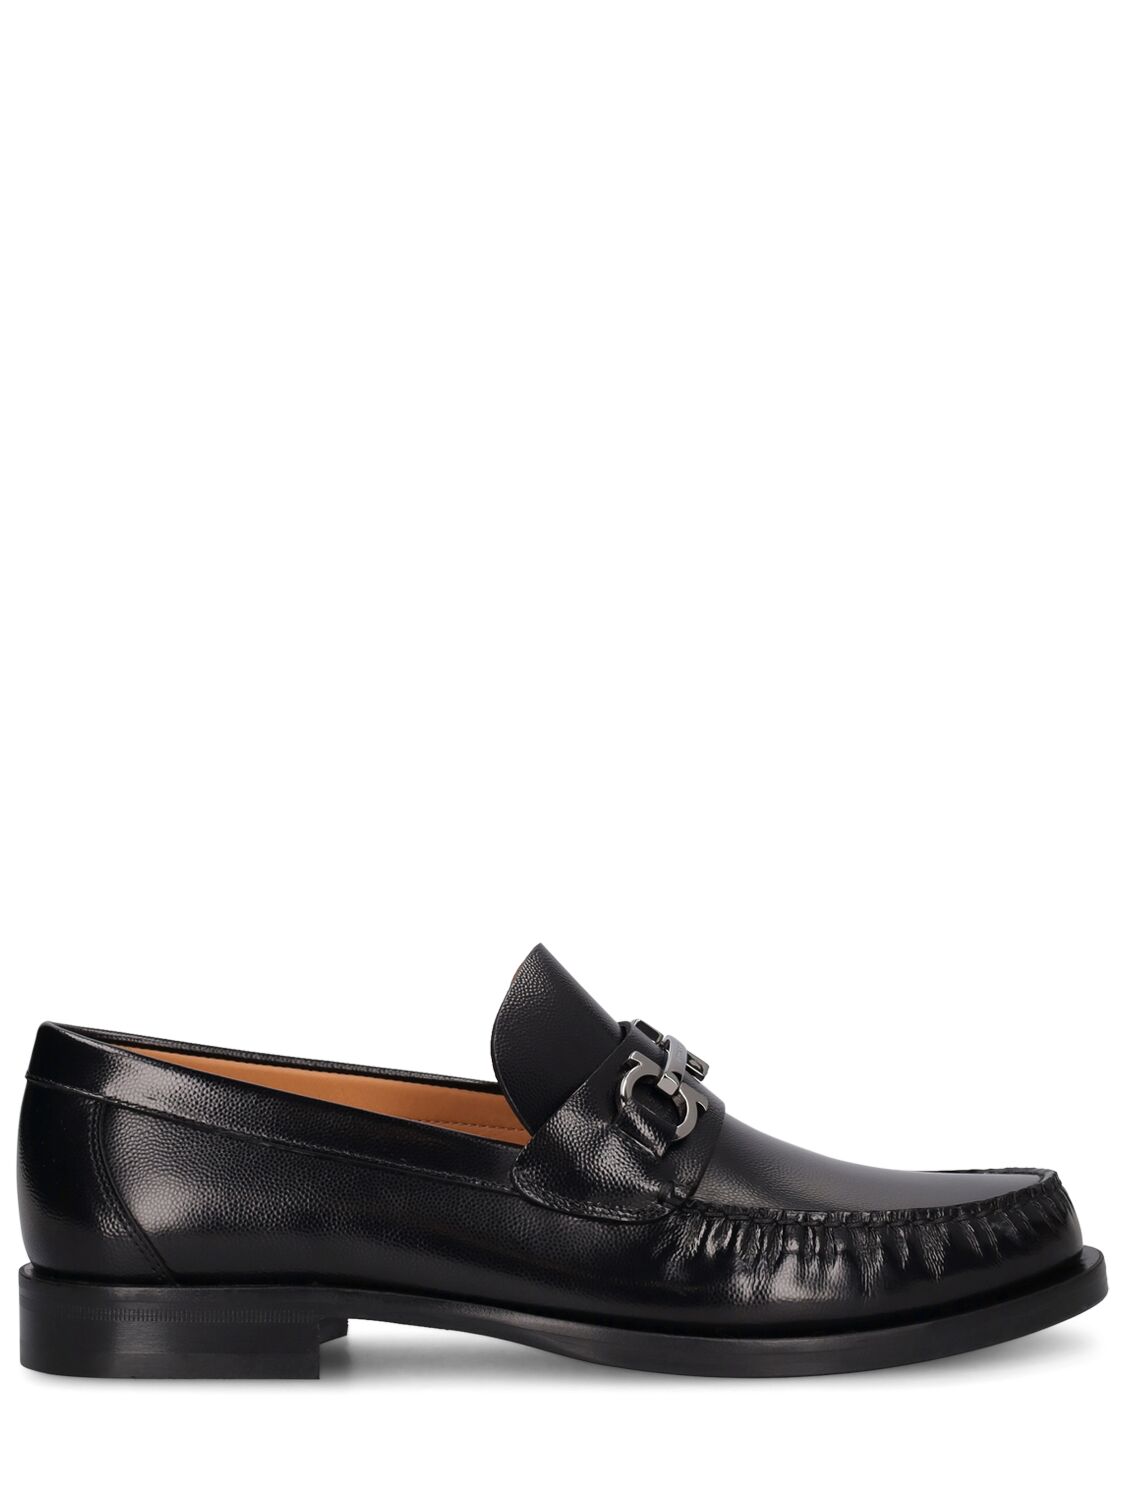 FERRAGAMO FORT LEATHER LOAFERS